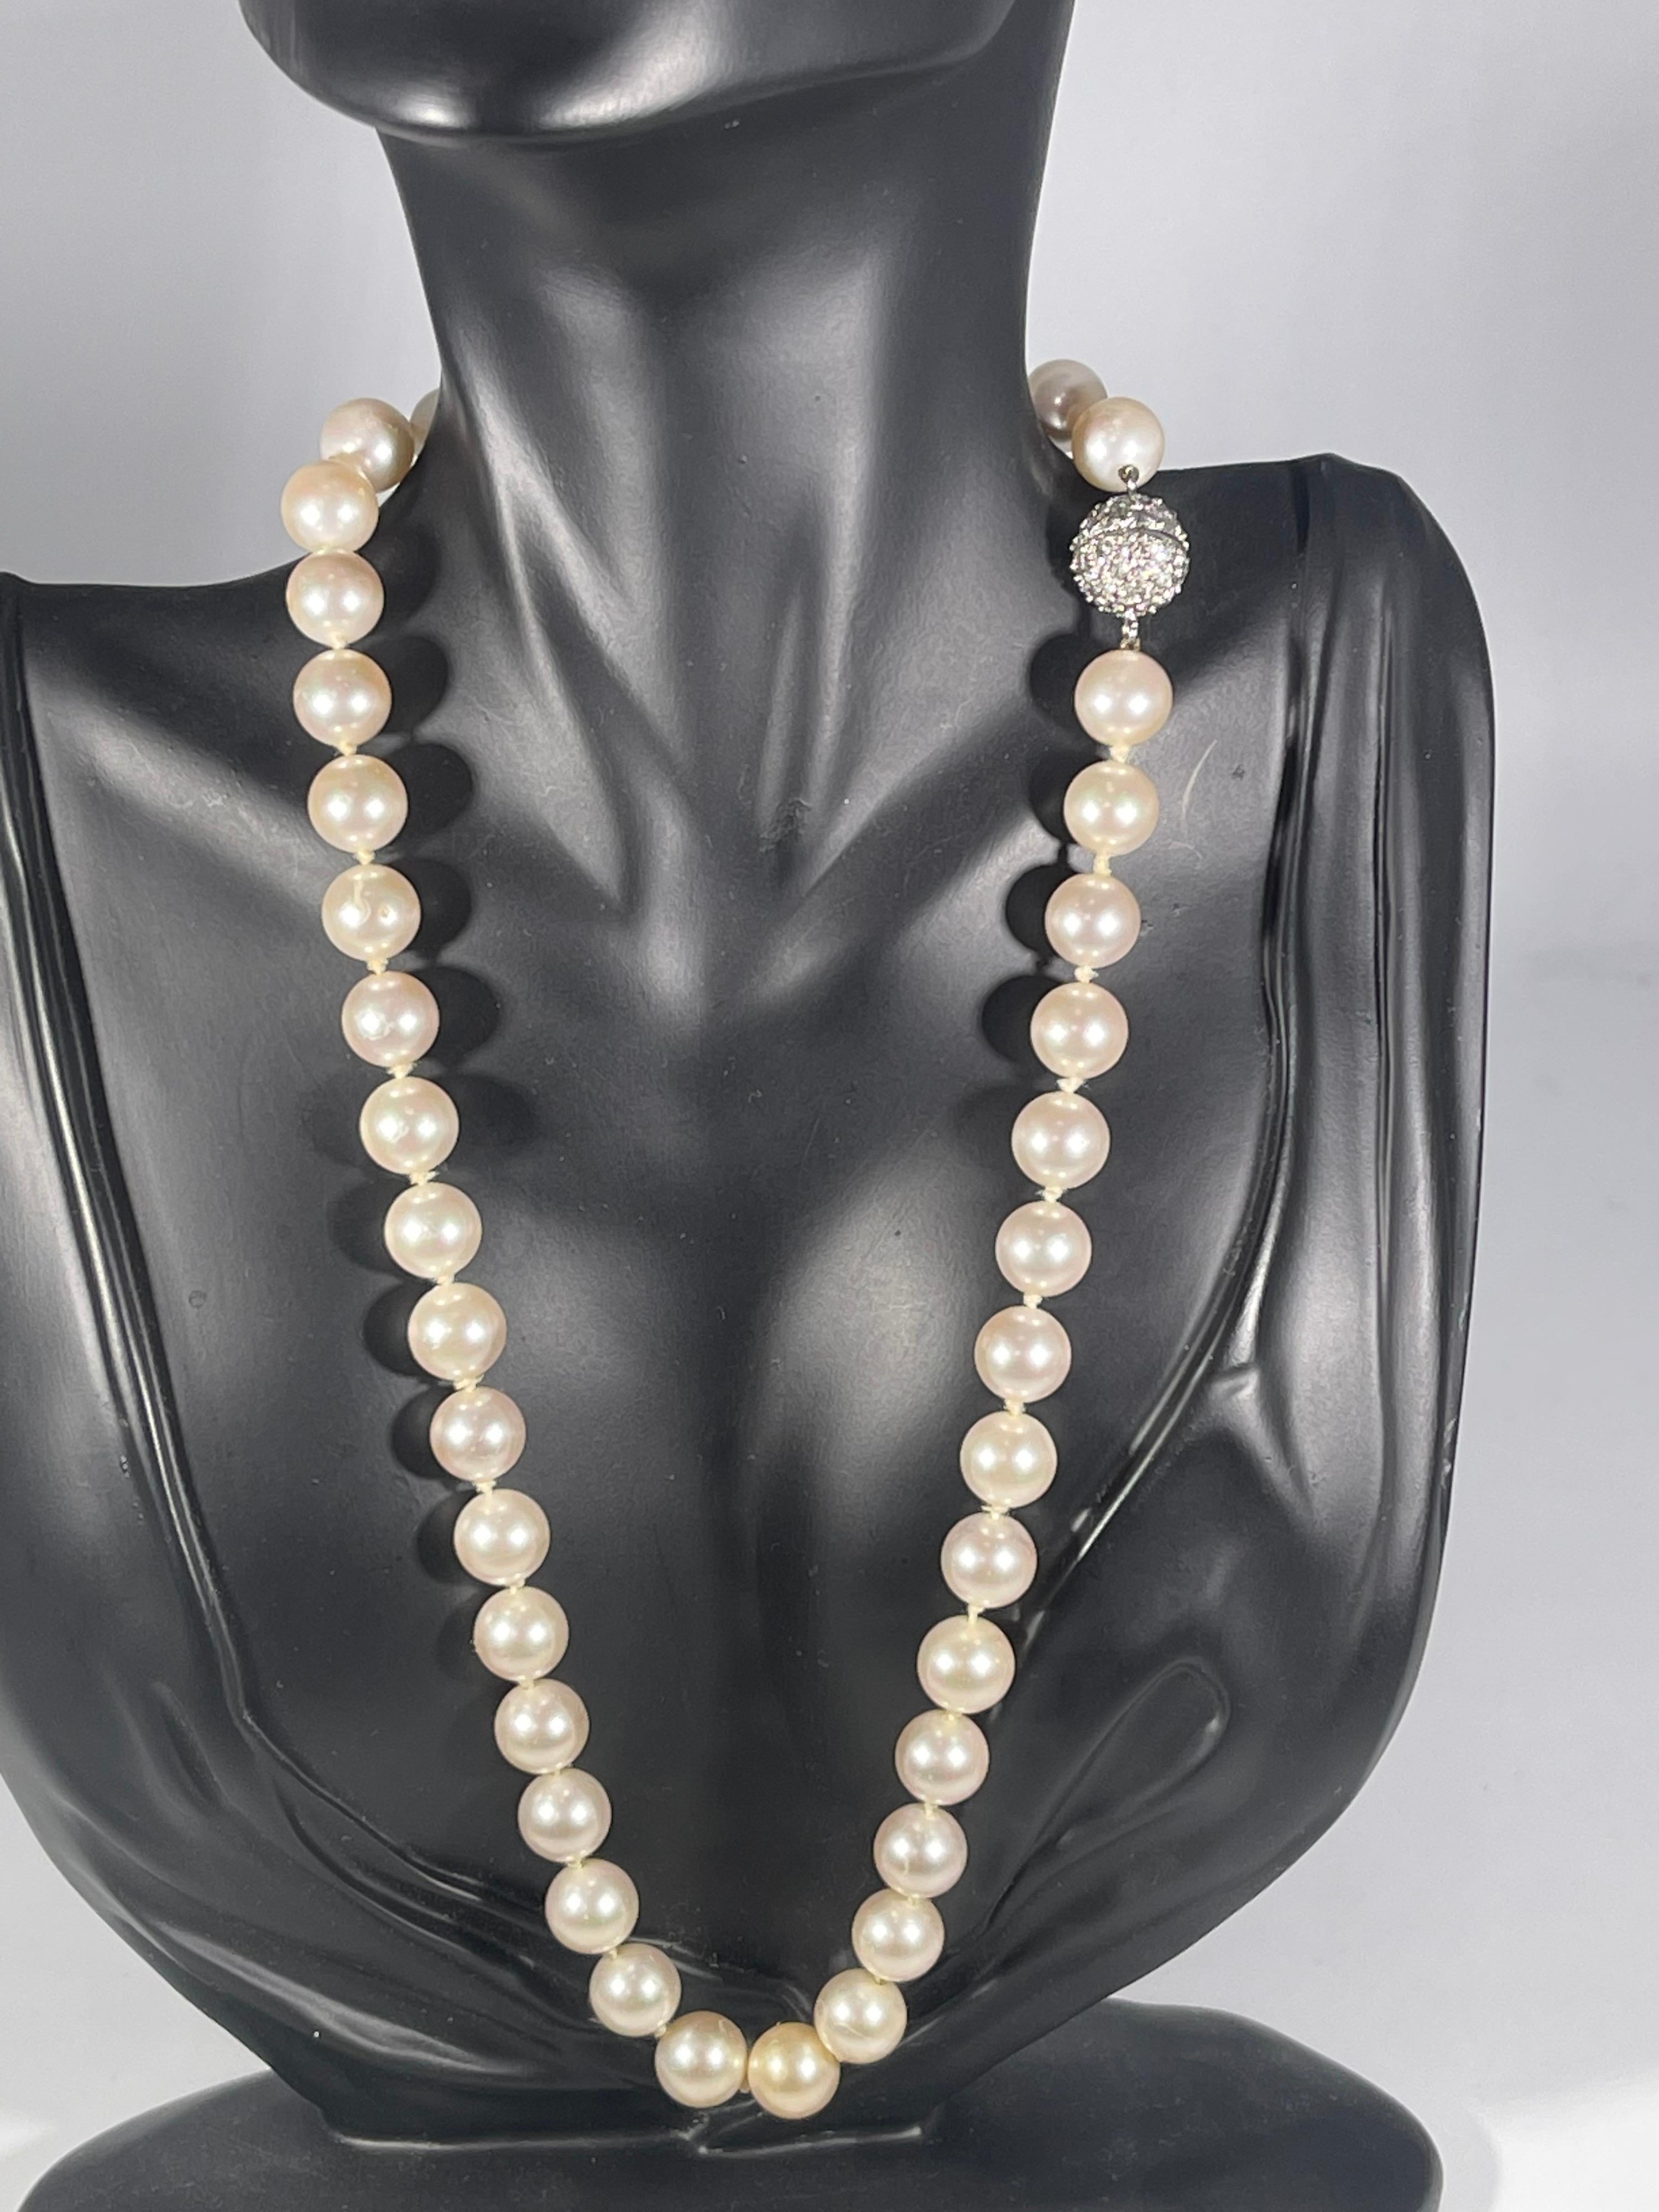 41 Round Akoya Pearls Strand Necklace Set in Metal Ball Clasp For Sale 9